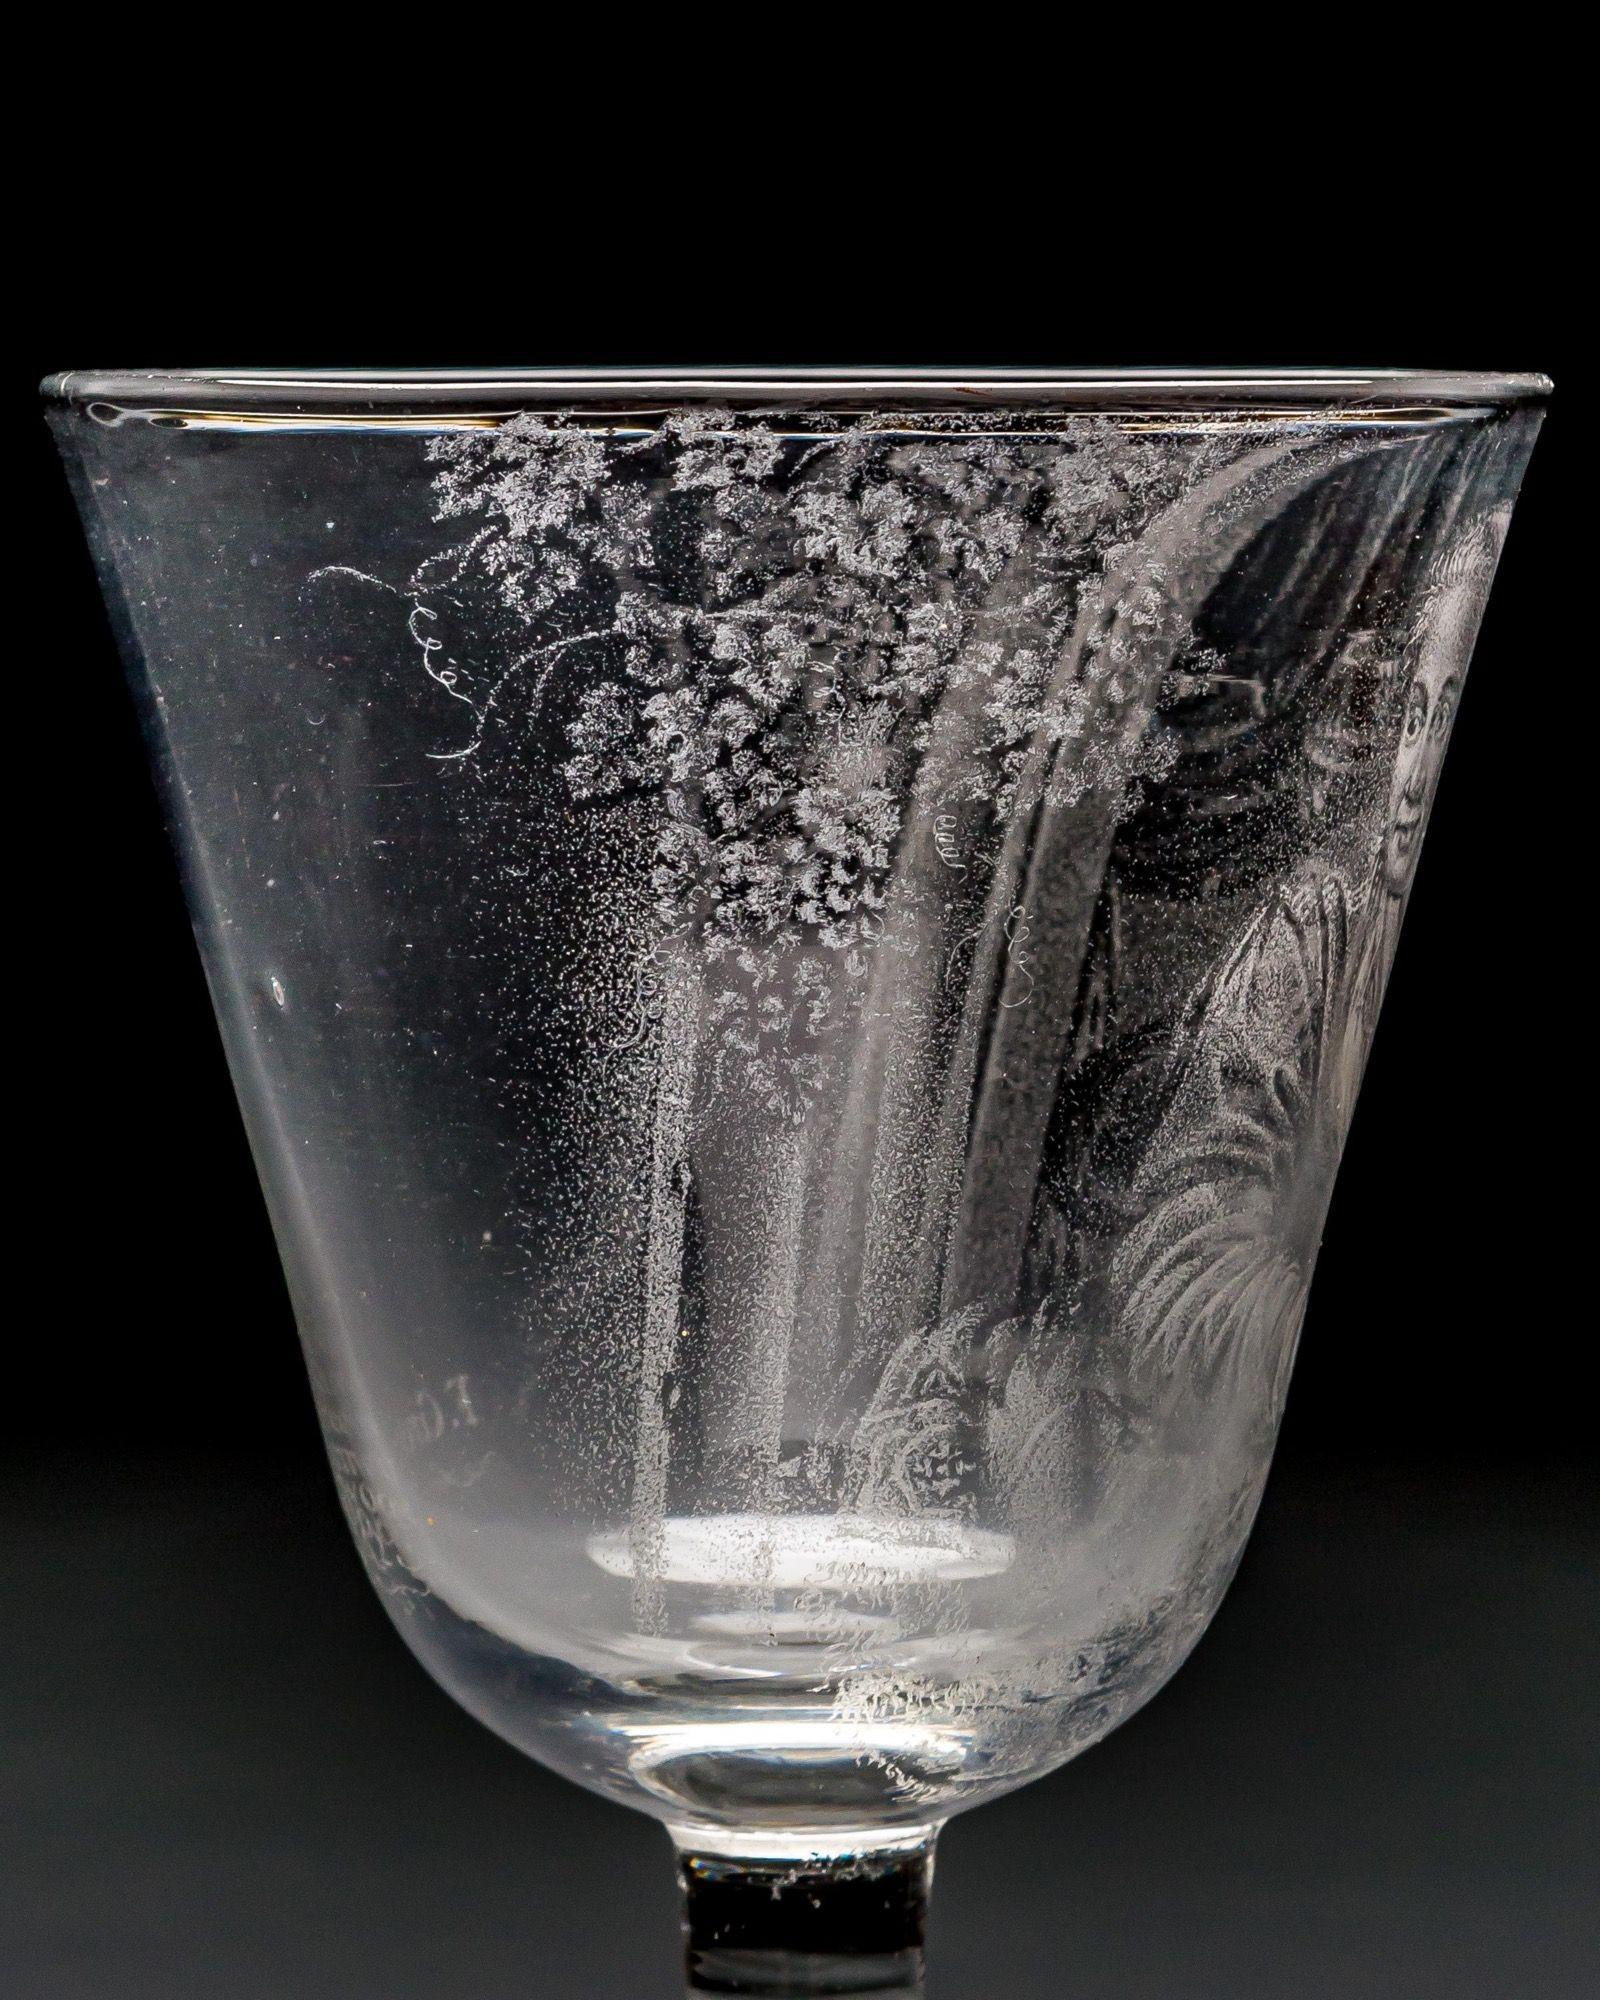 A Rare Documentary Stipple-Engraved Goblet Engraved By Frans Greenwood  In Good Condition For Sale In Steyning, West sussex